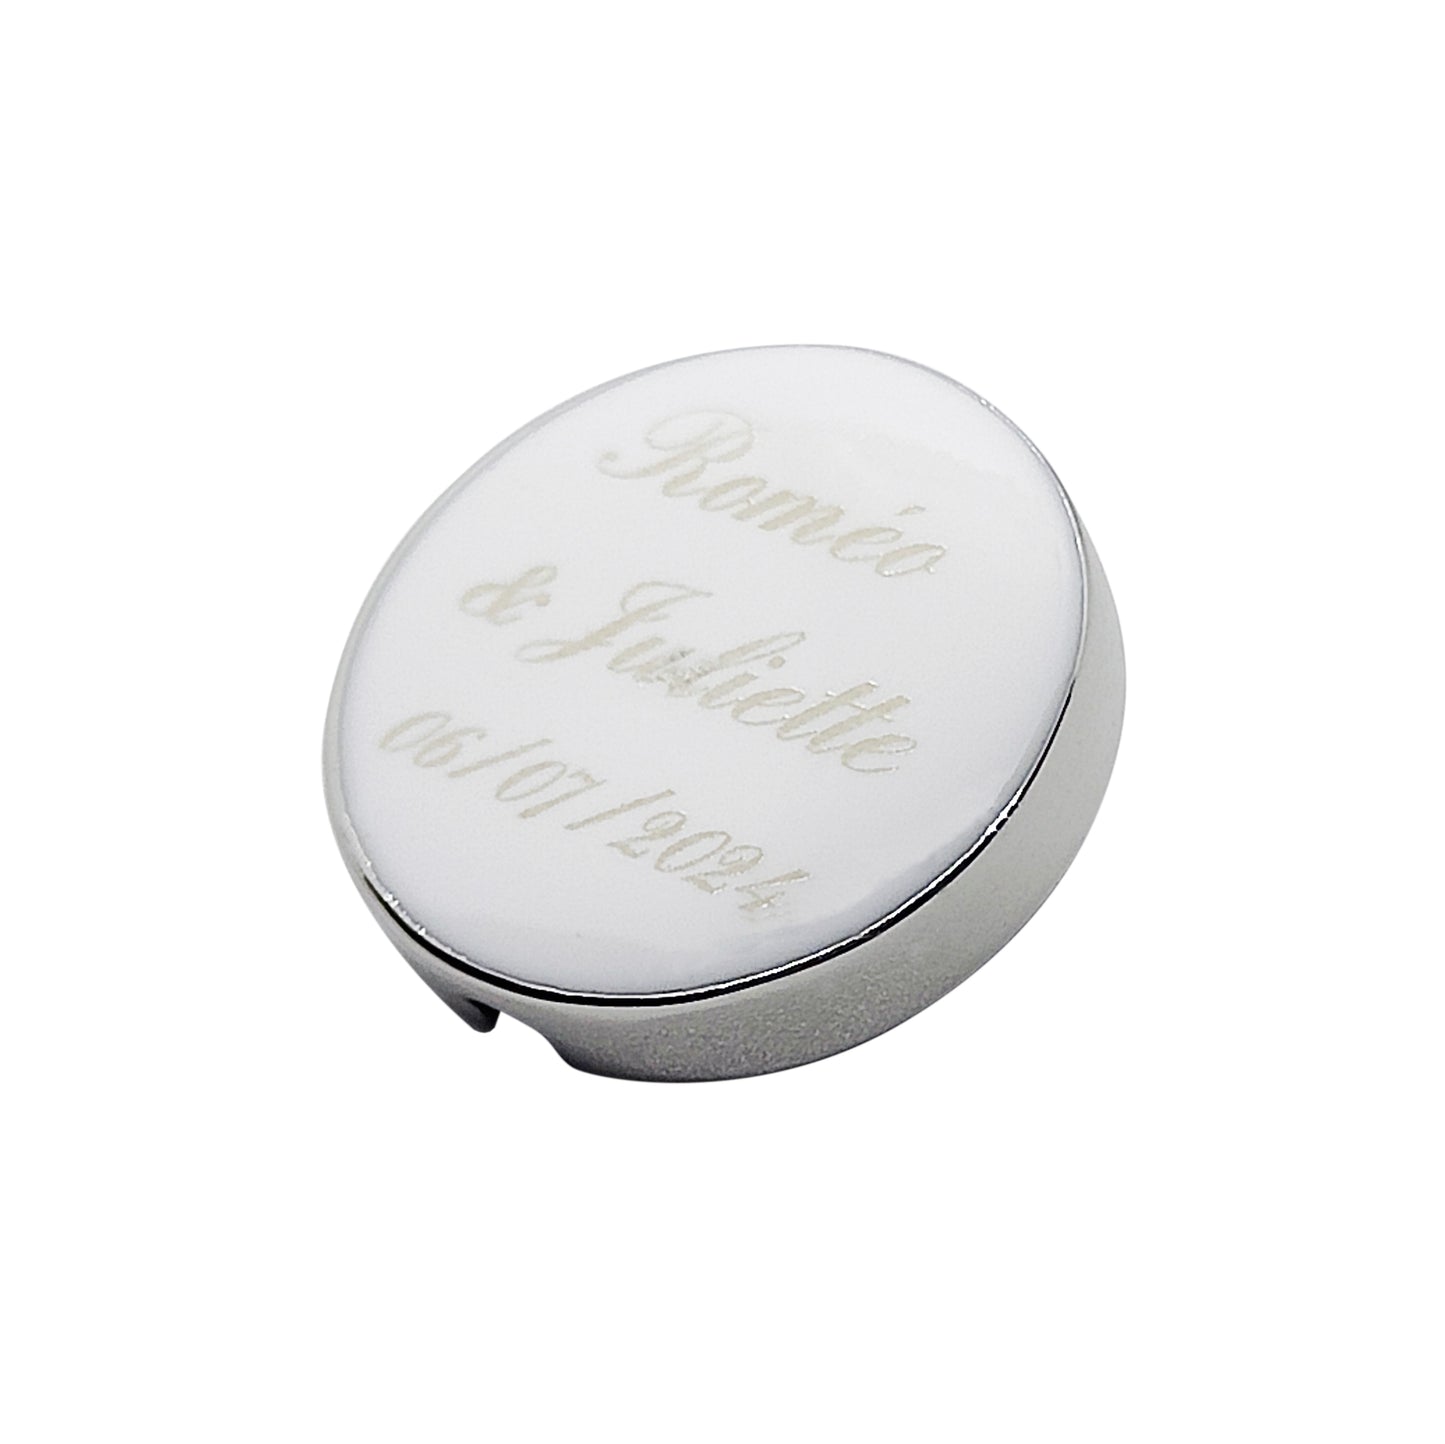 21mm button in shiny silver metal and customizable white enamel